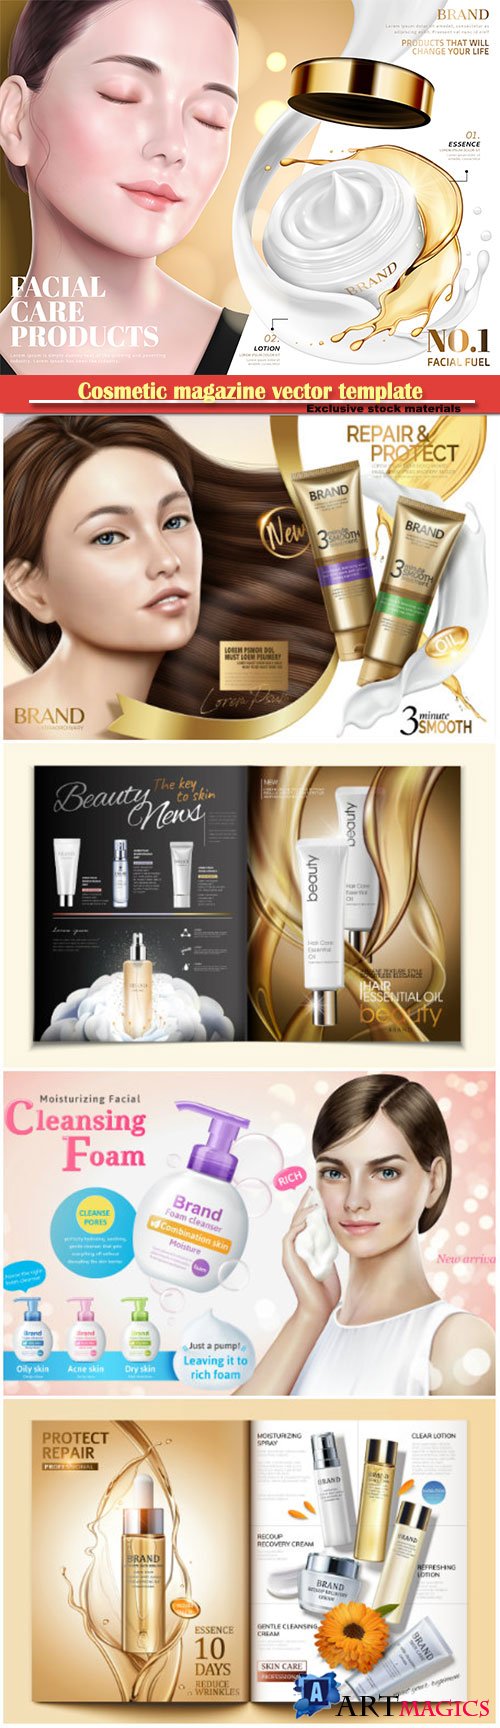 Cosmetic magazine vector template, attractive model with product containers in 3d illustration # 7